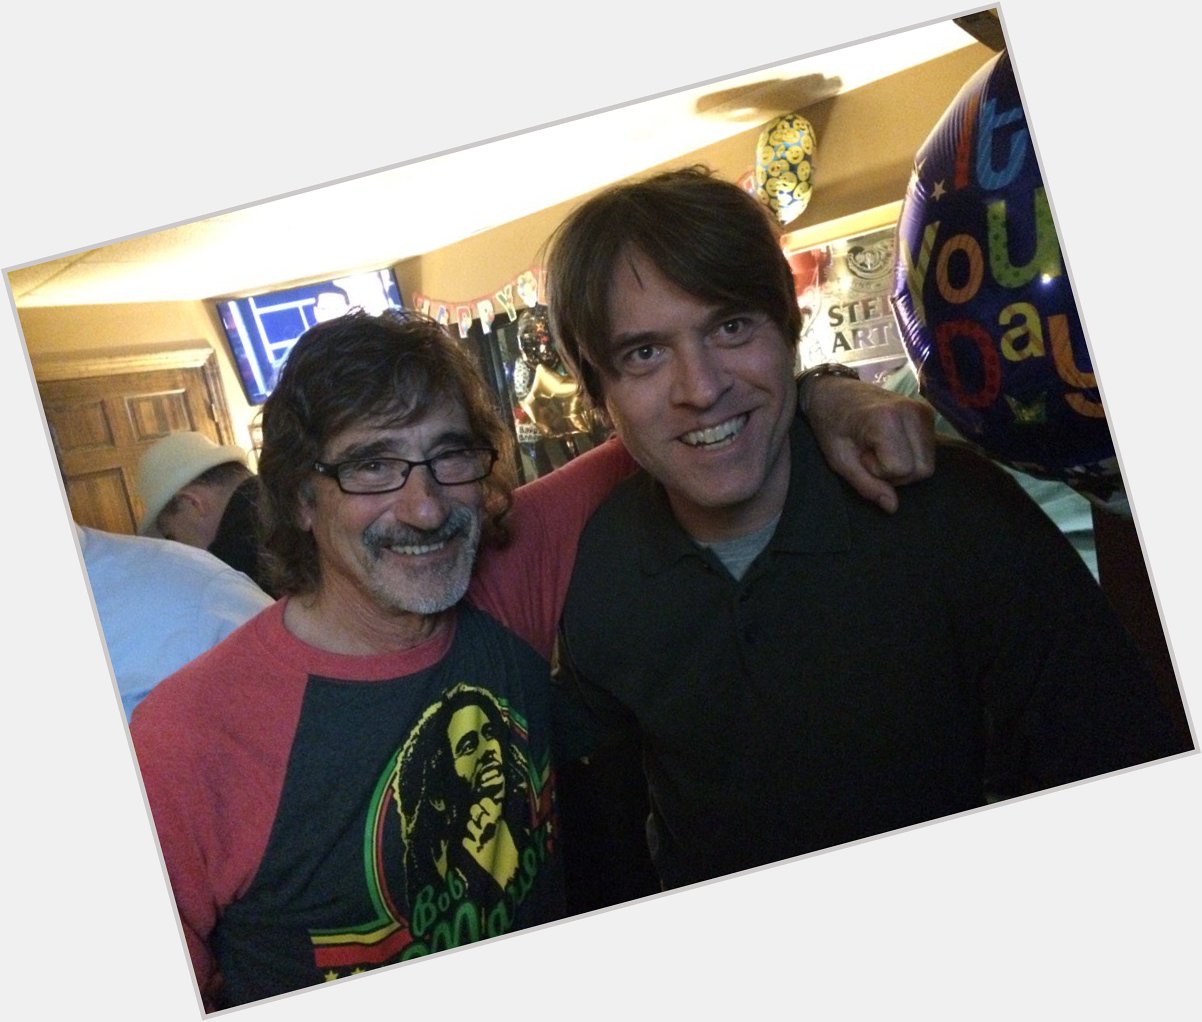 It\s King Cool\s birthday! A full house at cigar lounge wishing Donnie Iris a happy birthday!  